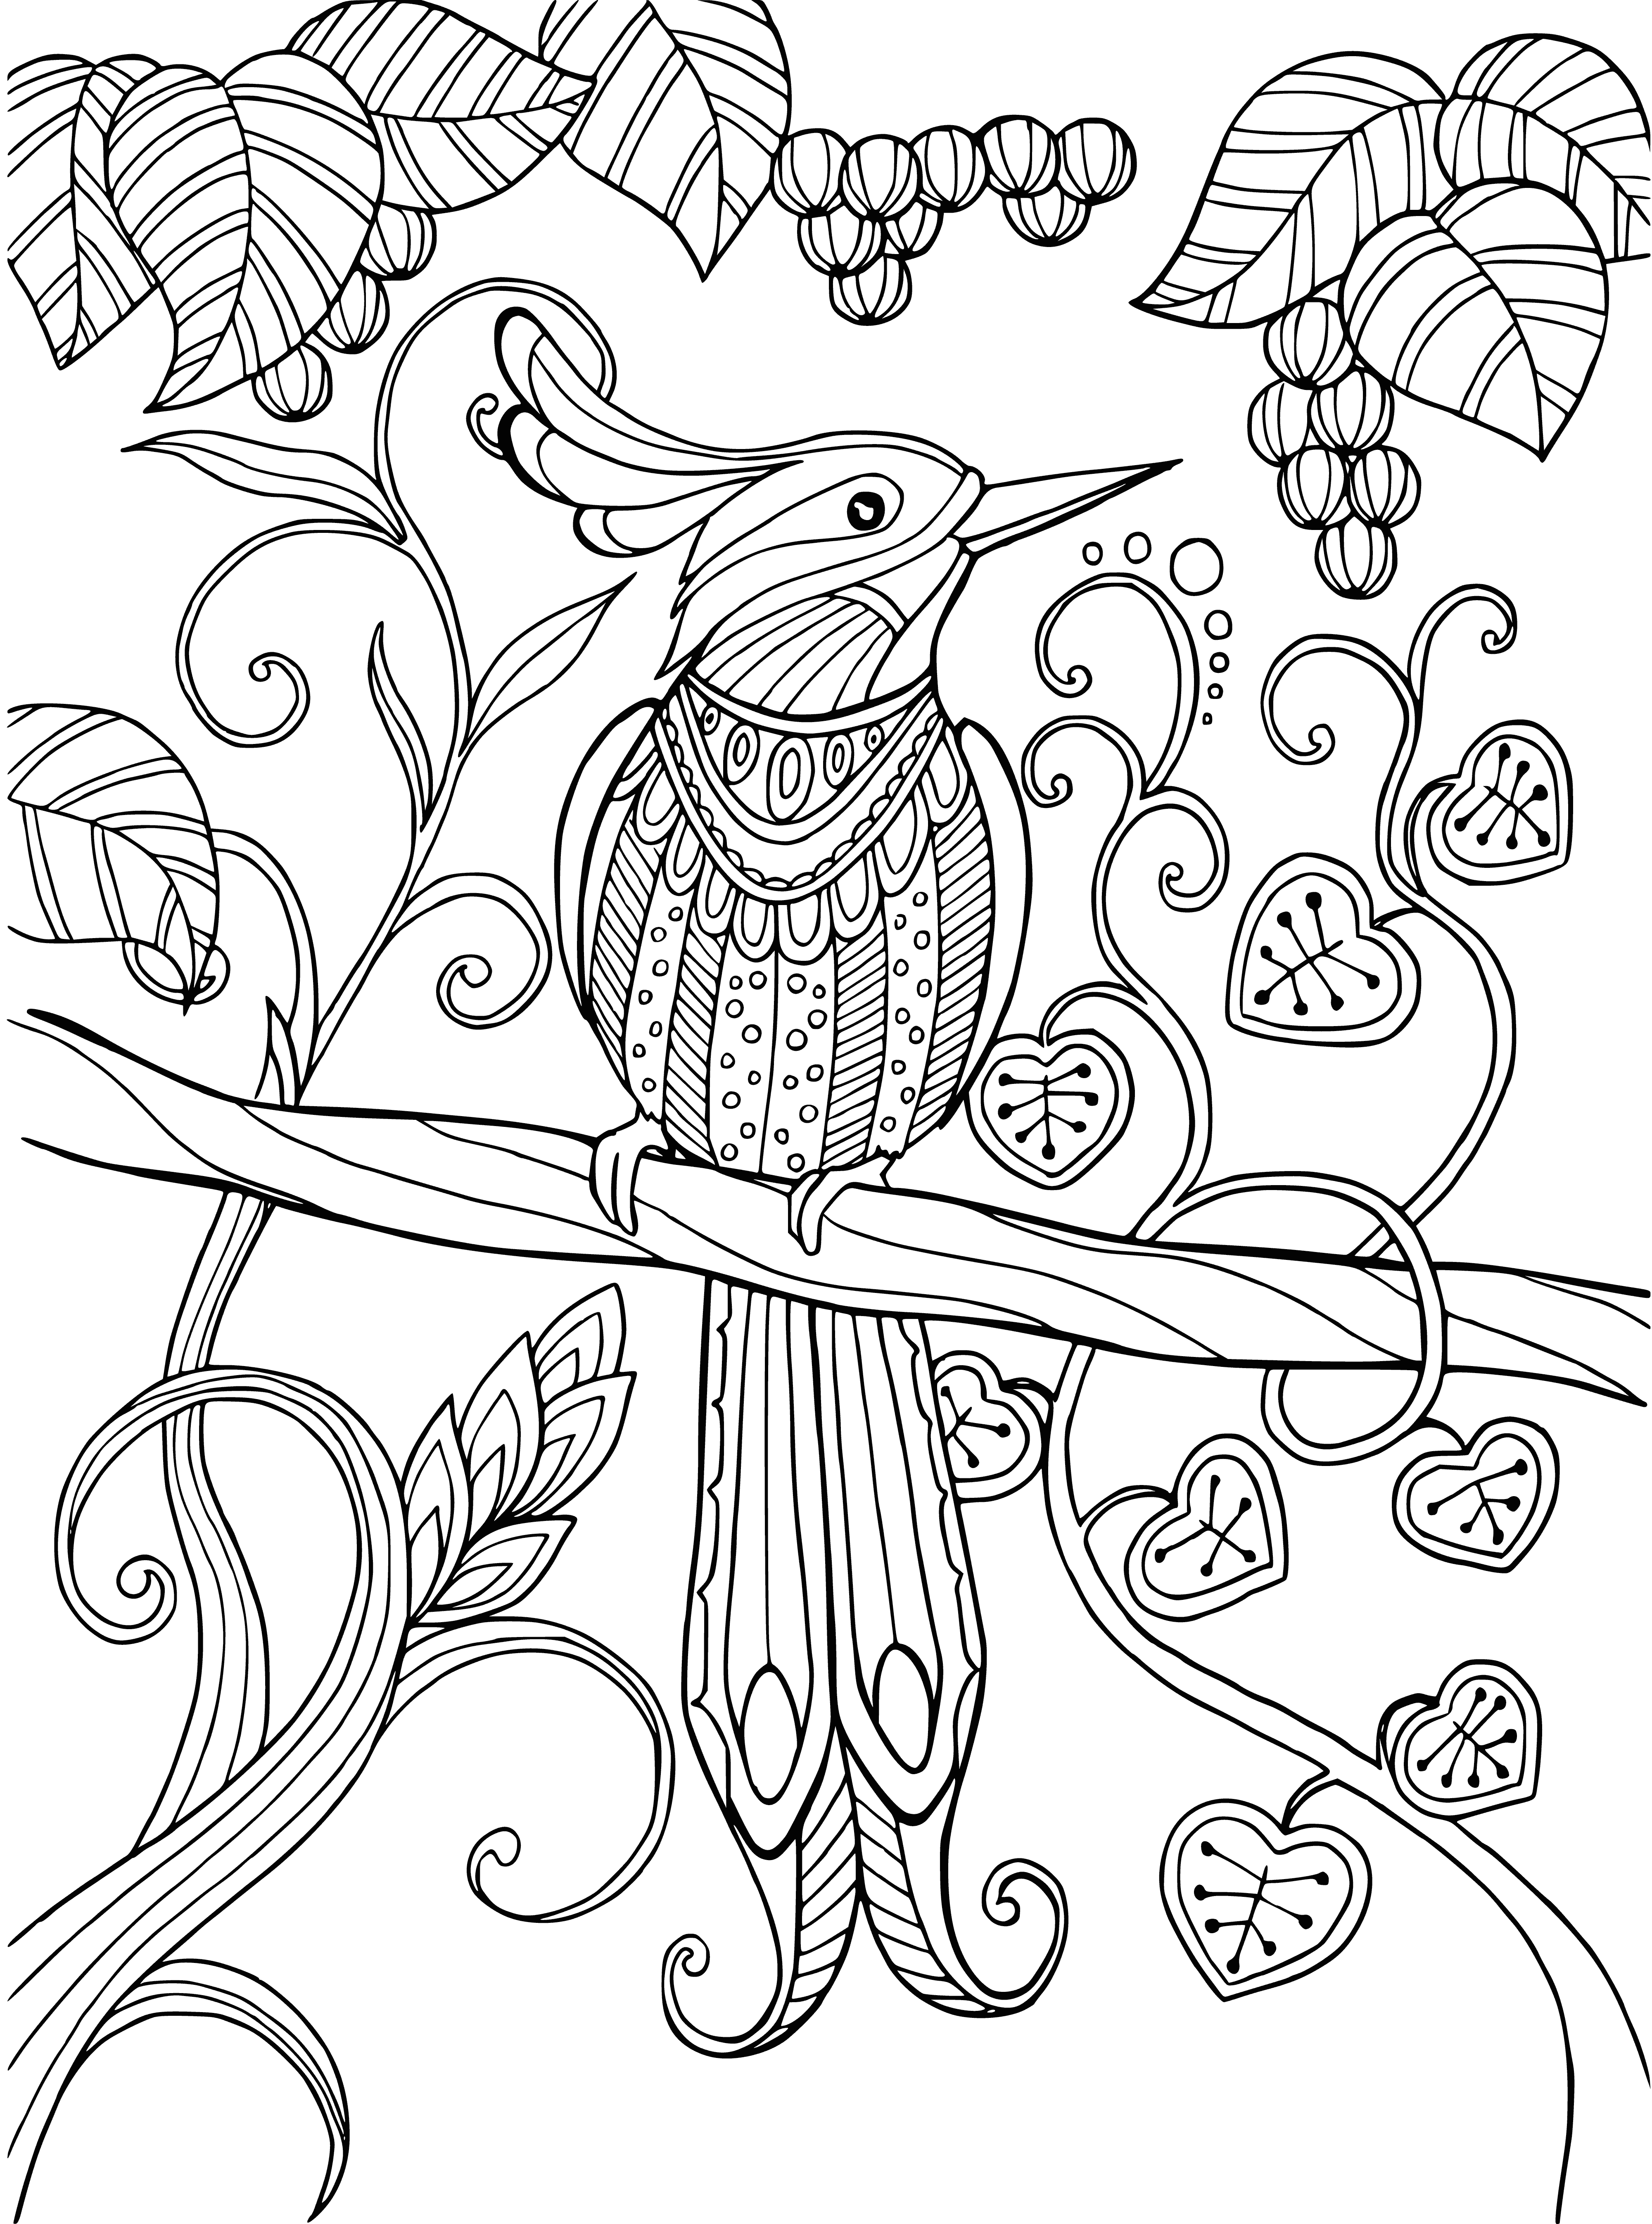 coloring page: Bird perched atop branch singing, surrounded by leaves & flowers.